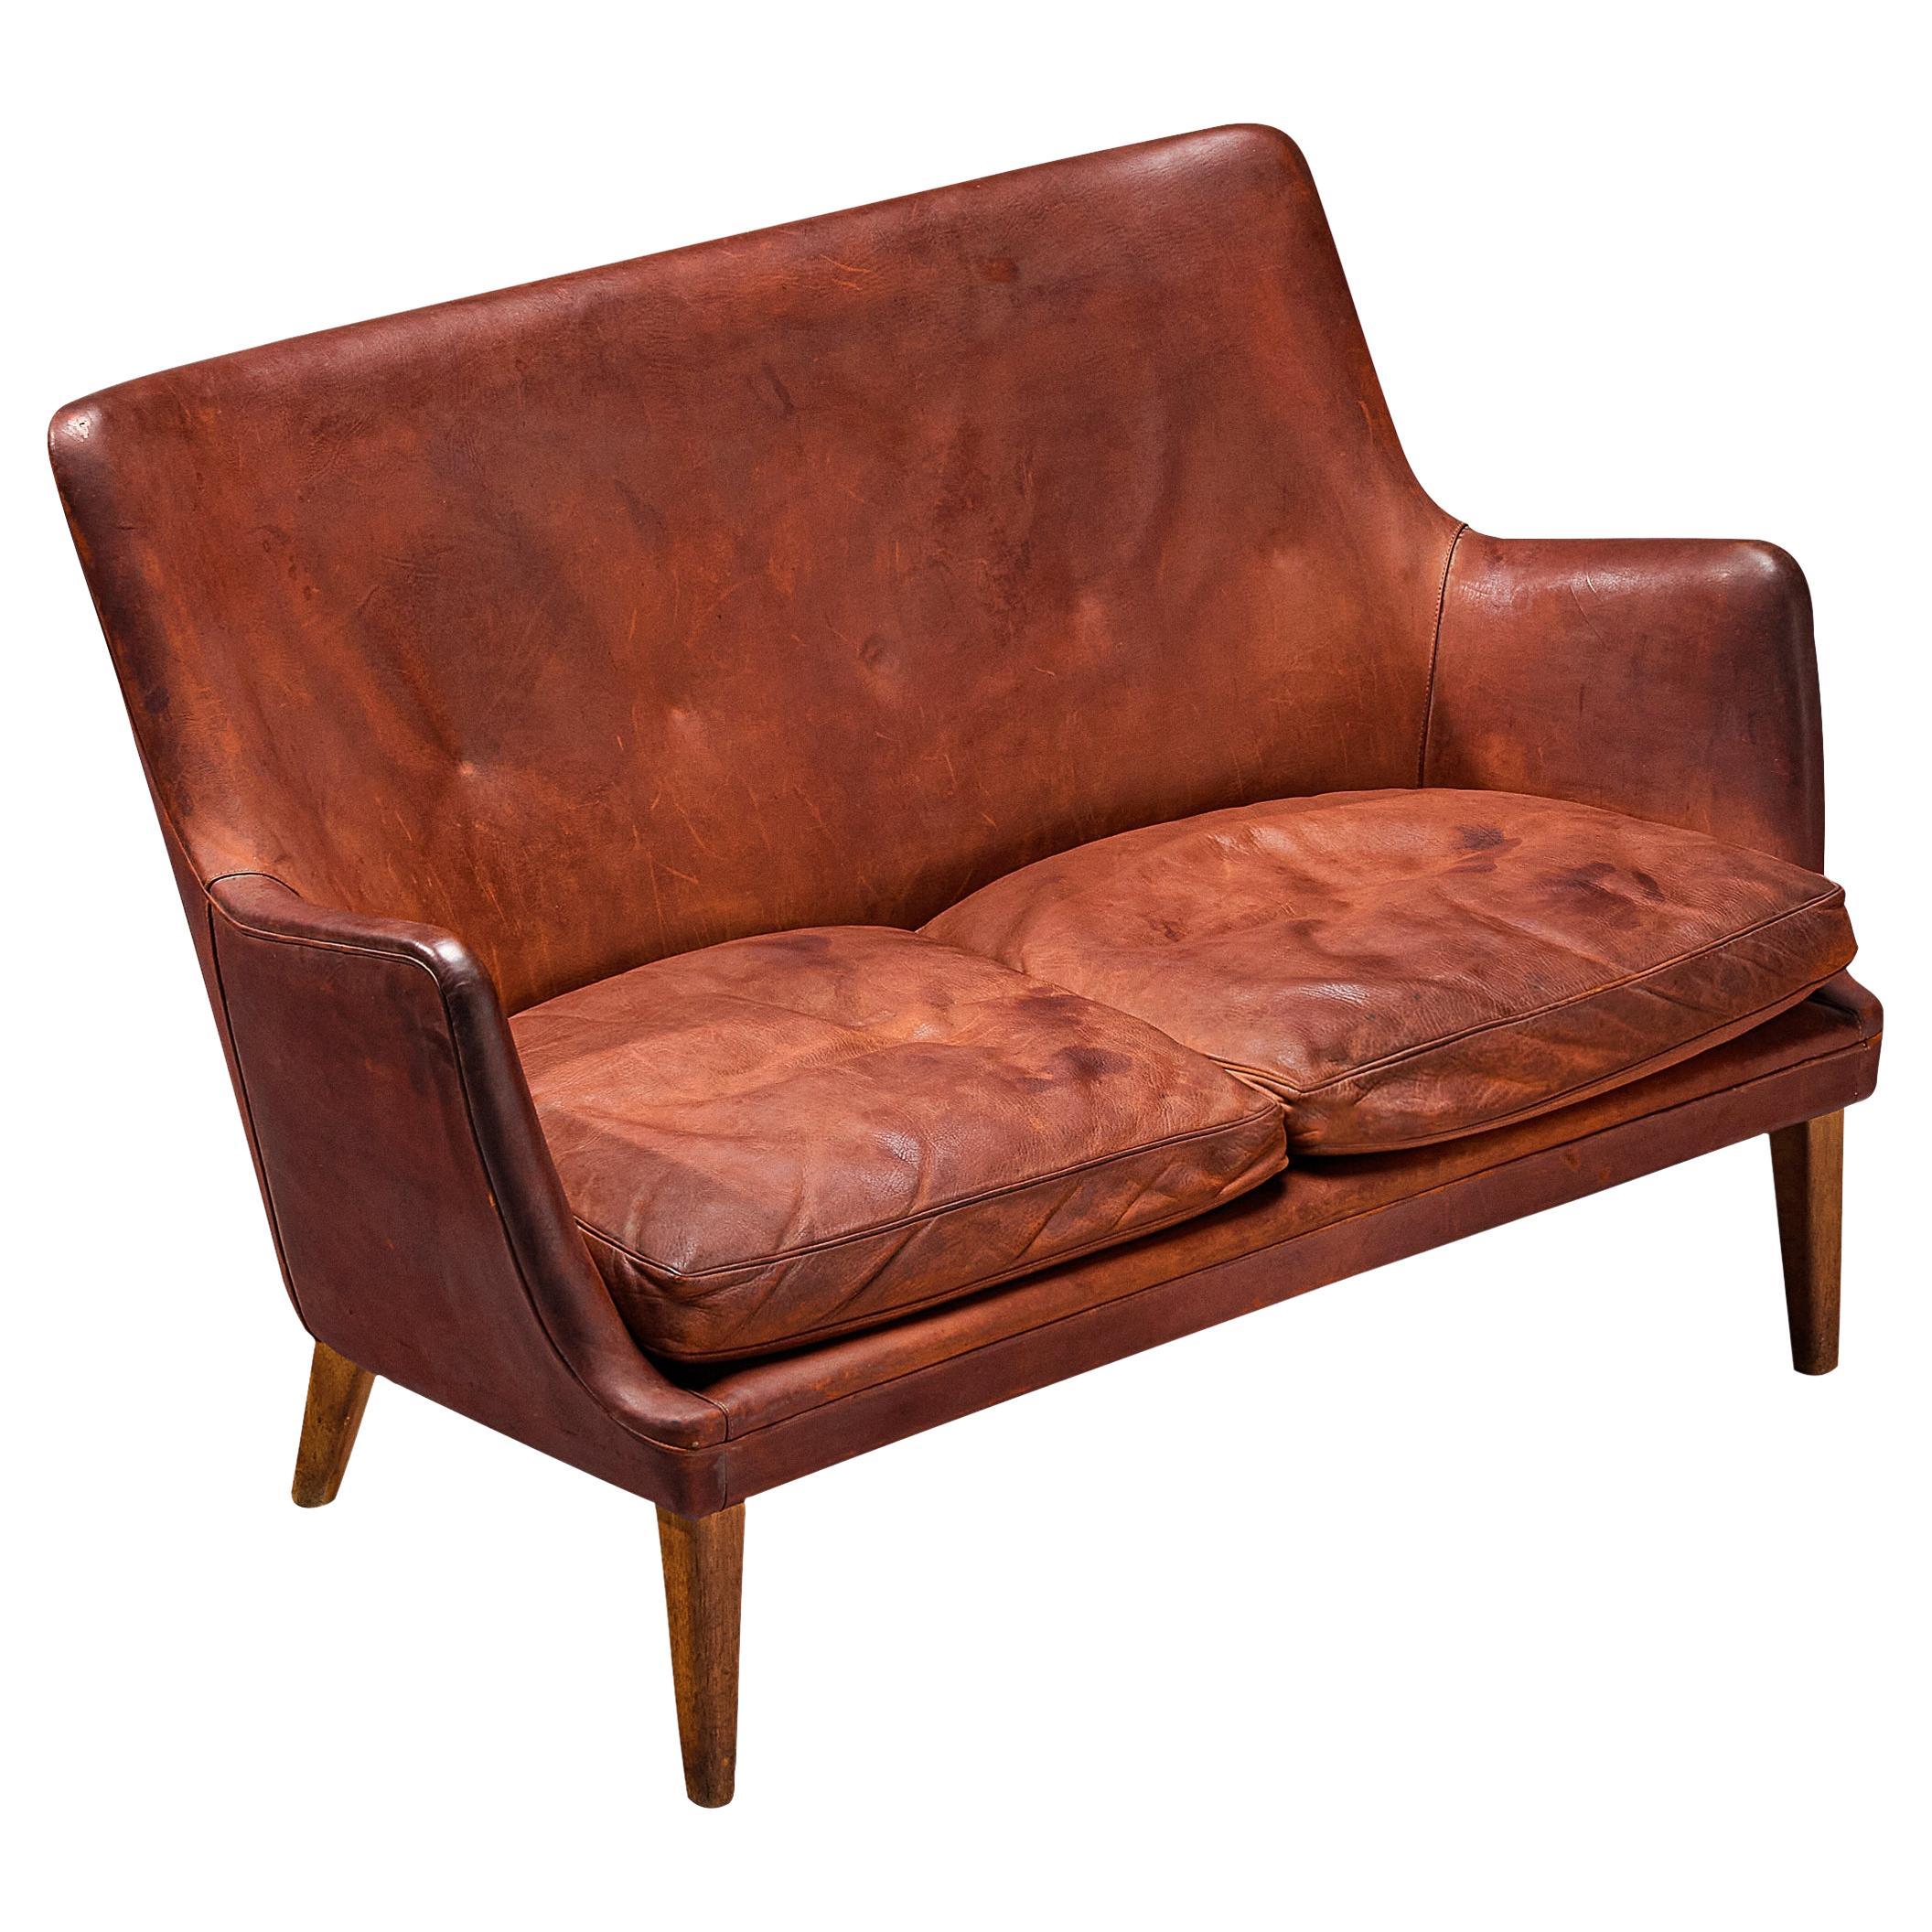 Arne Vodder Sofa in Patinated Cognac Leather For Sale